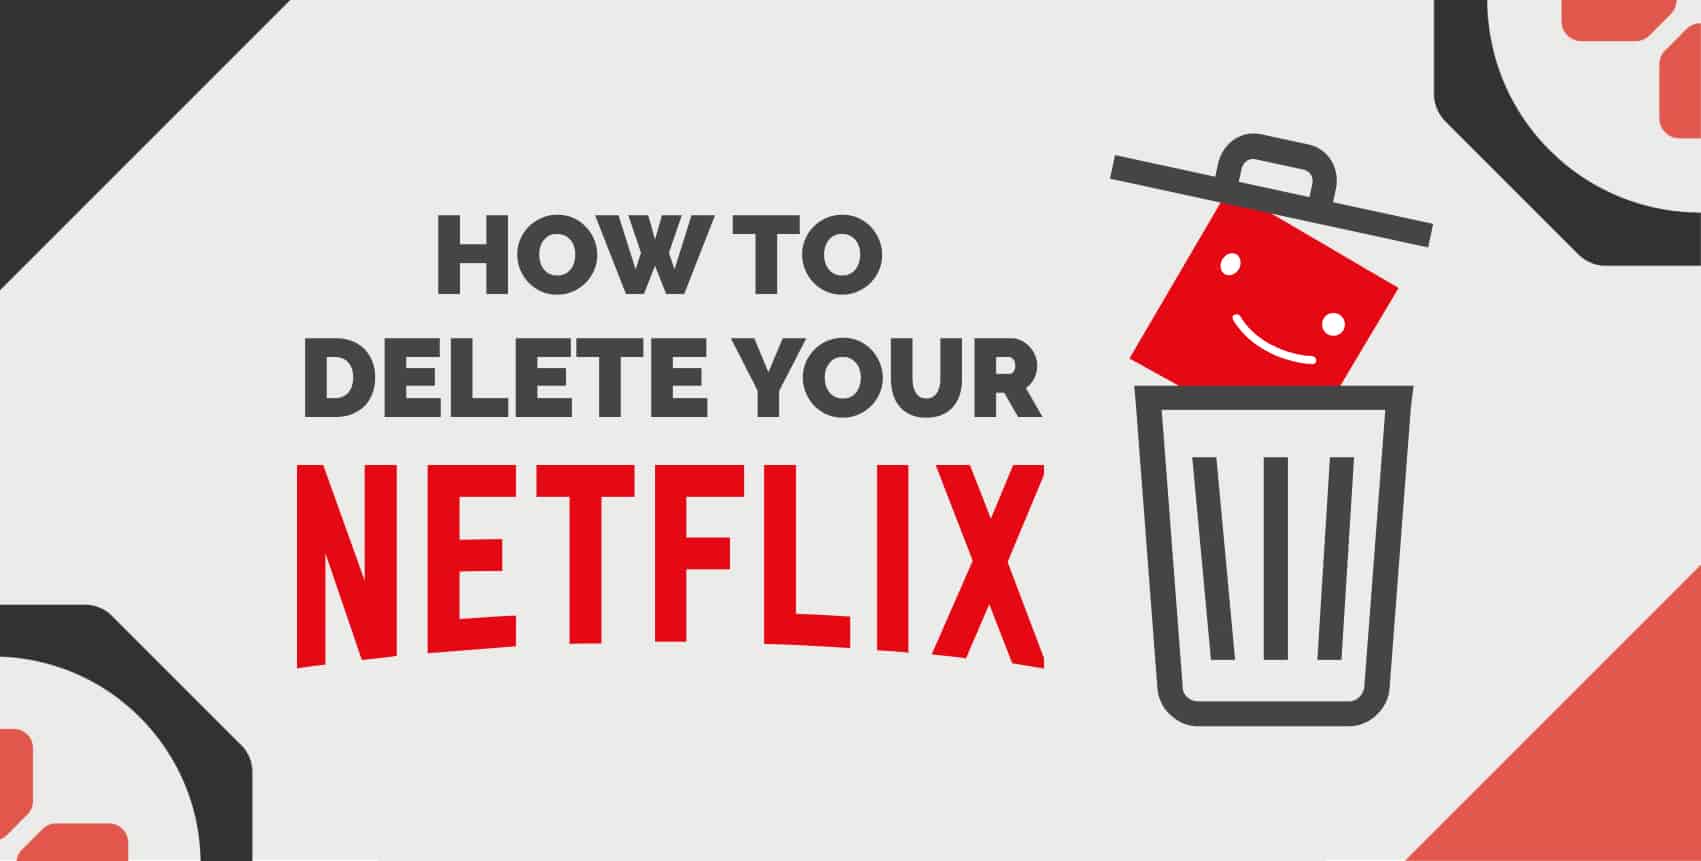 How to Delete Your Netflix Account In Under 2 Minutes